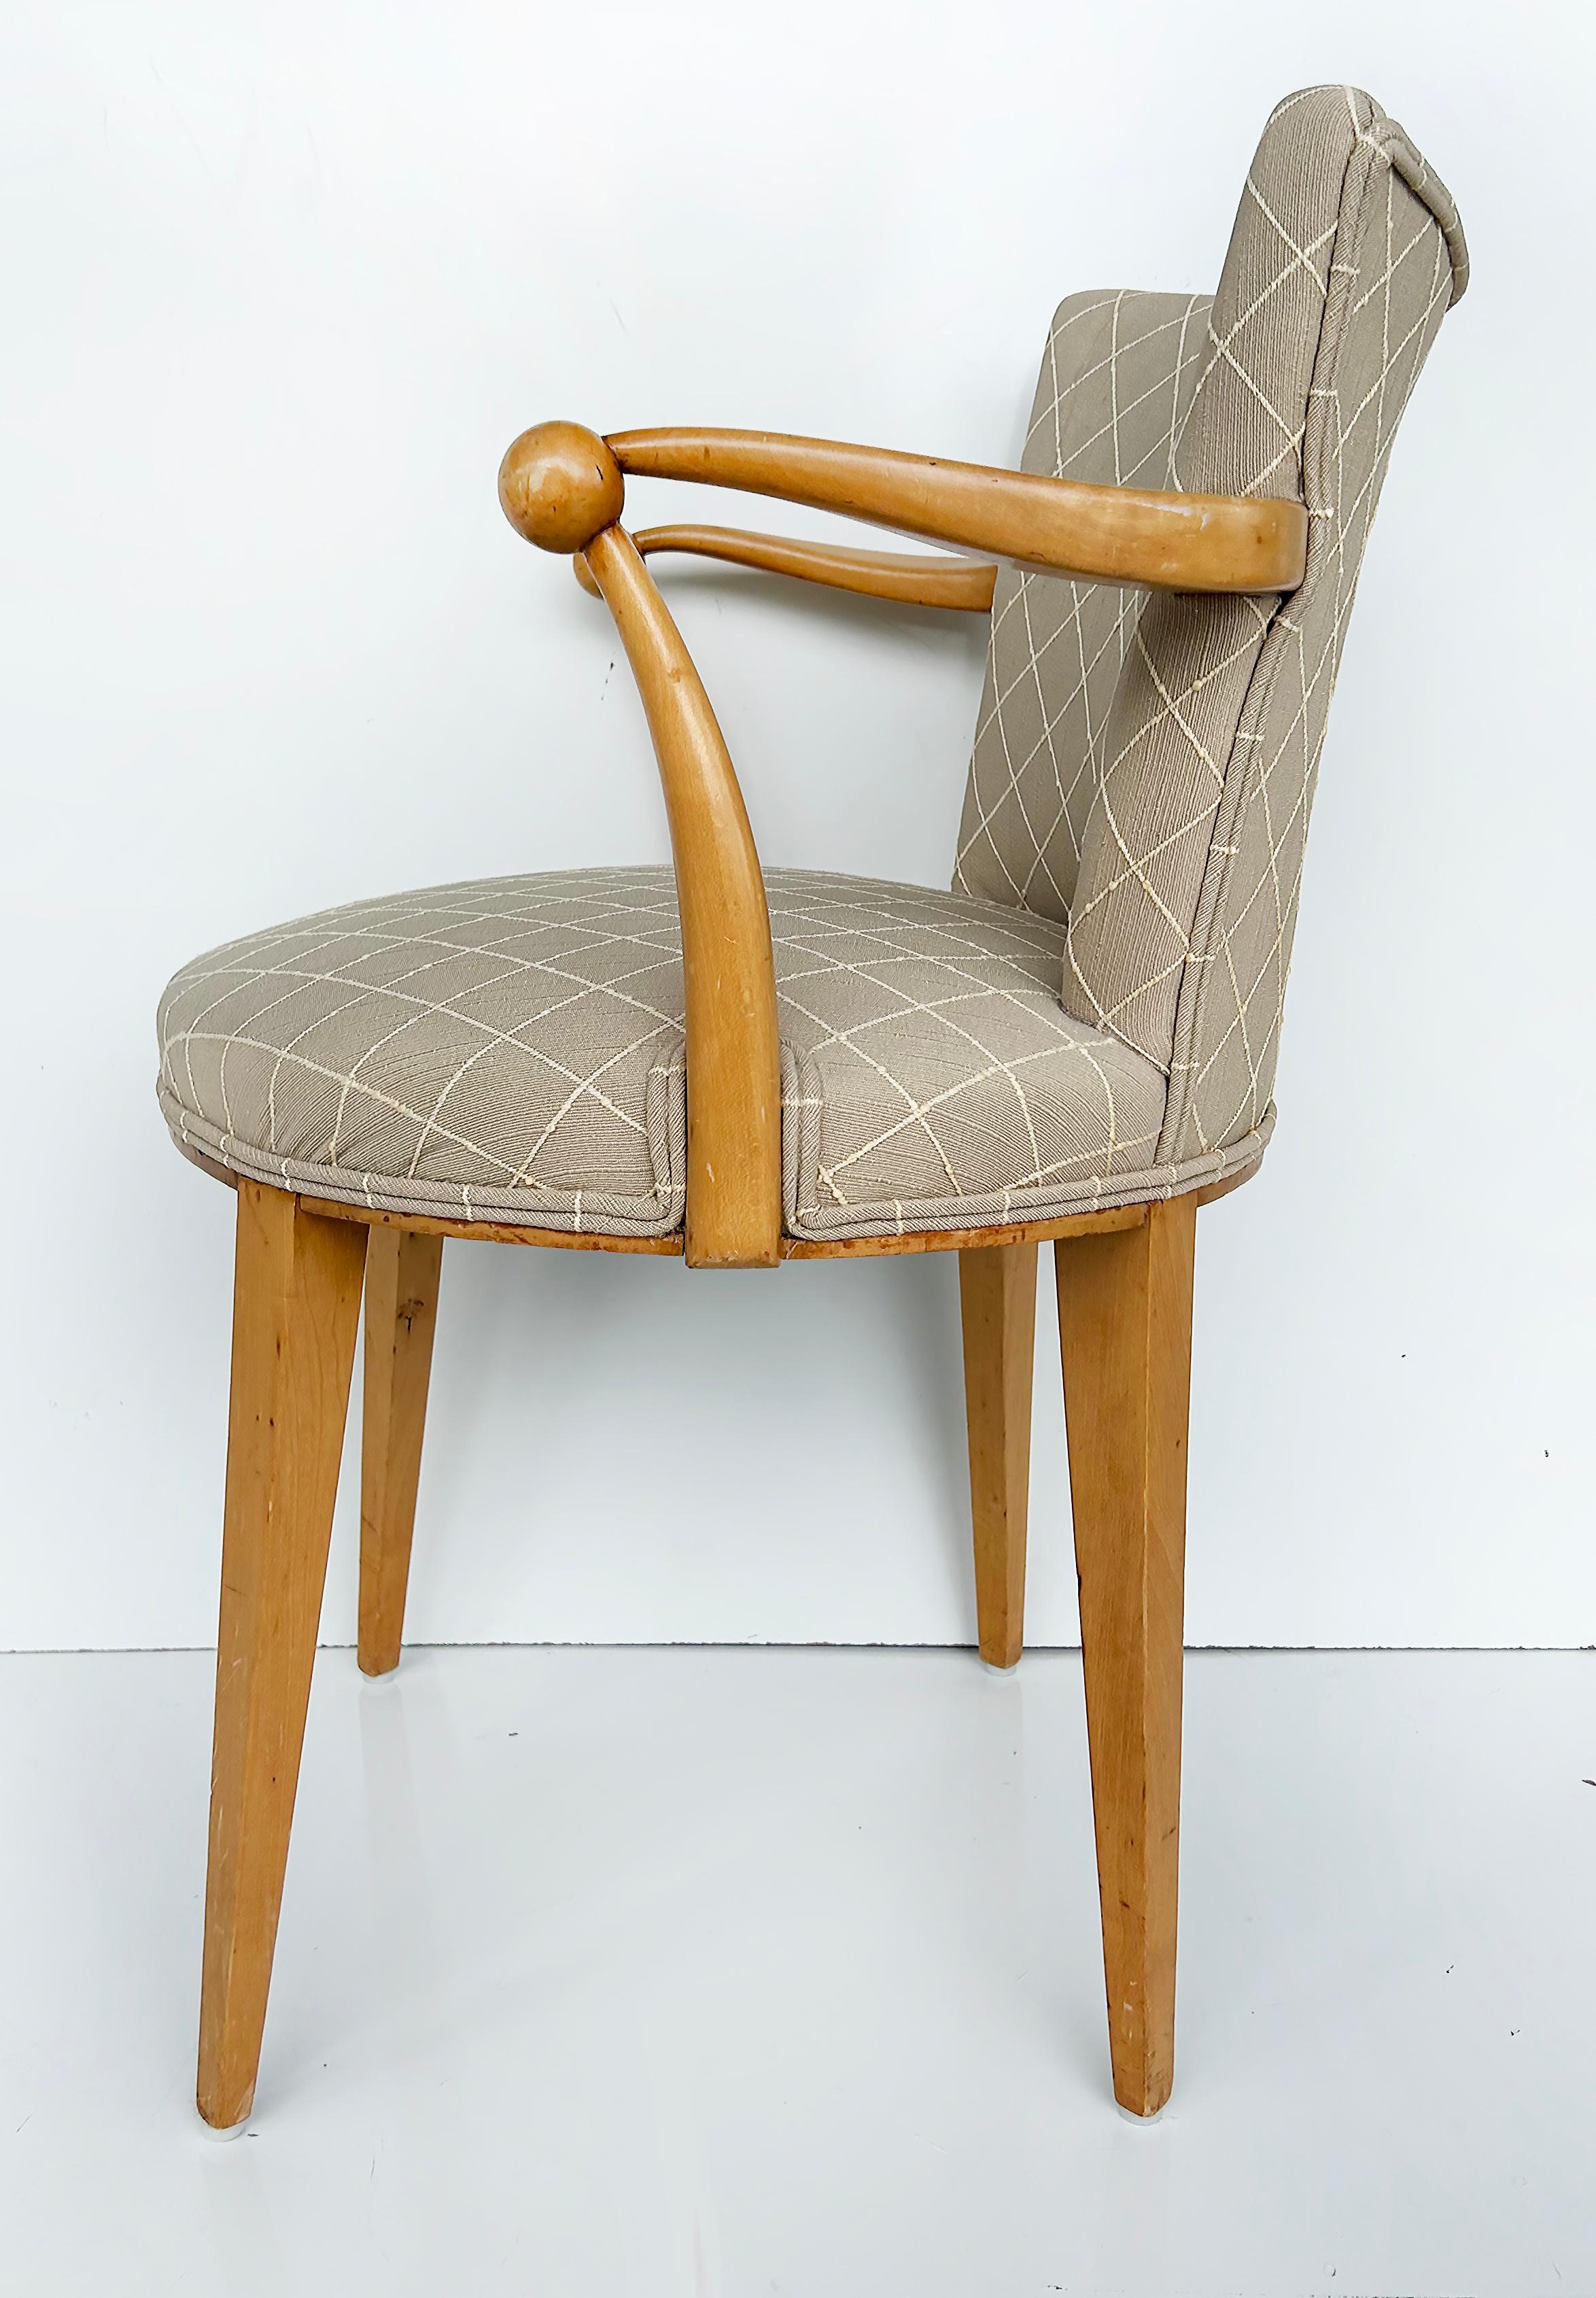 Sycamore Wood Upholstered Vanity or Desk Chair with Stylized Wood Arms and Legs

Offered for sale is an unusual stylized vintage Sycamore wood chair with curved arms that have decorative sphere details. The chair is upholstered in a subtle large